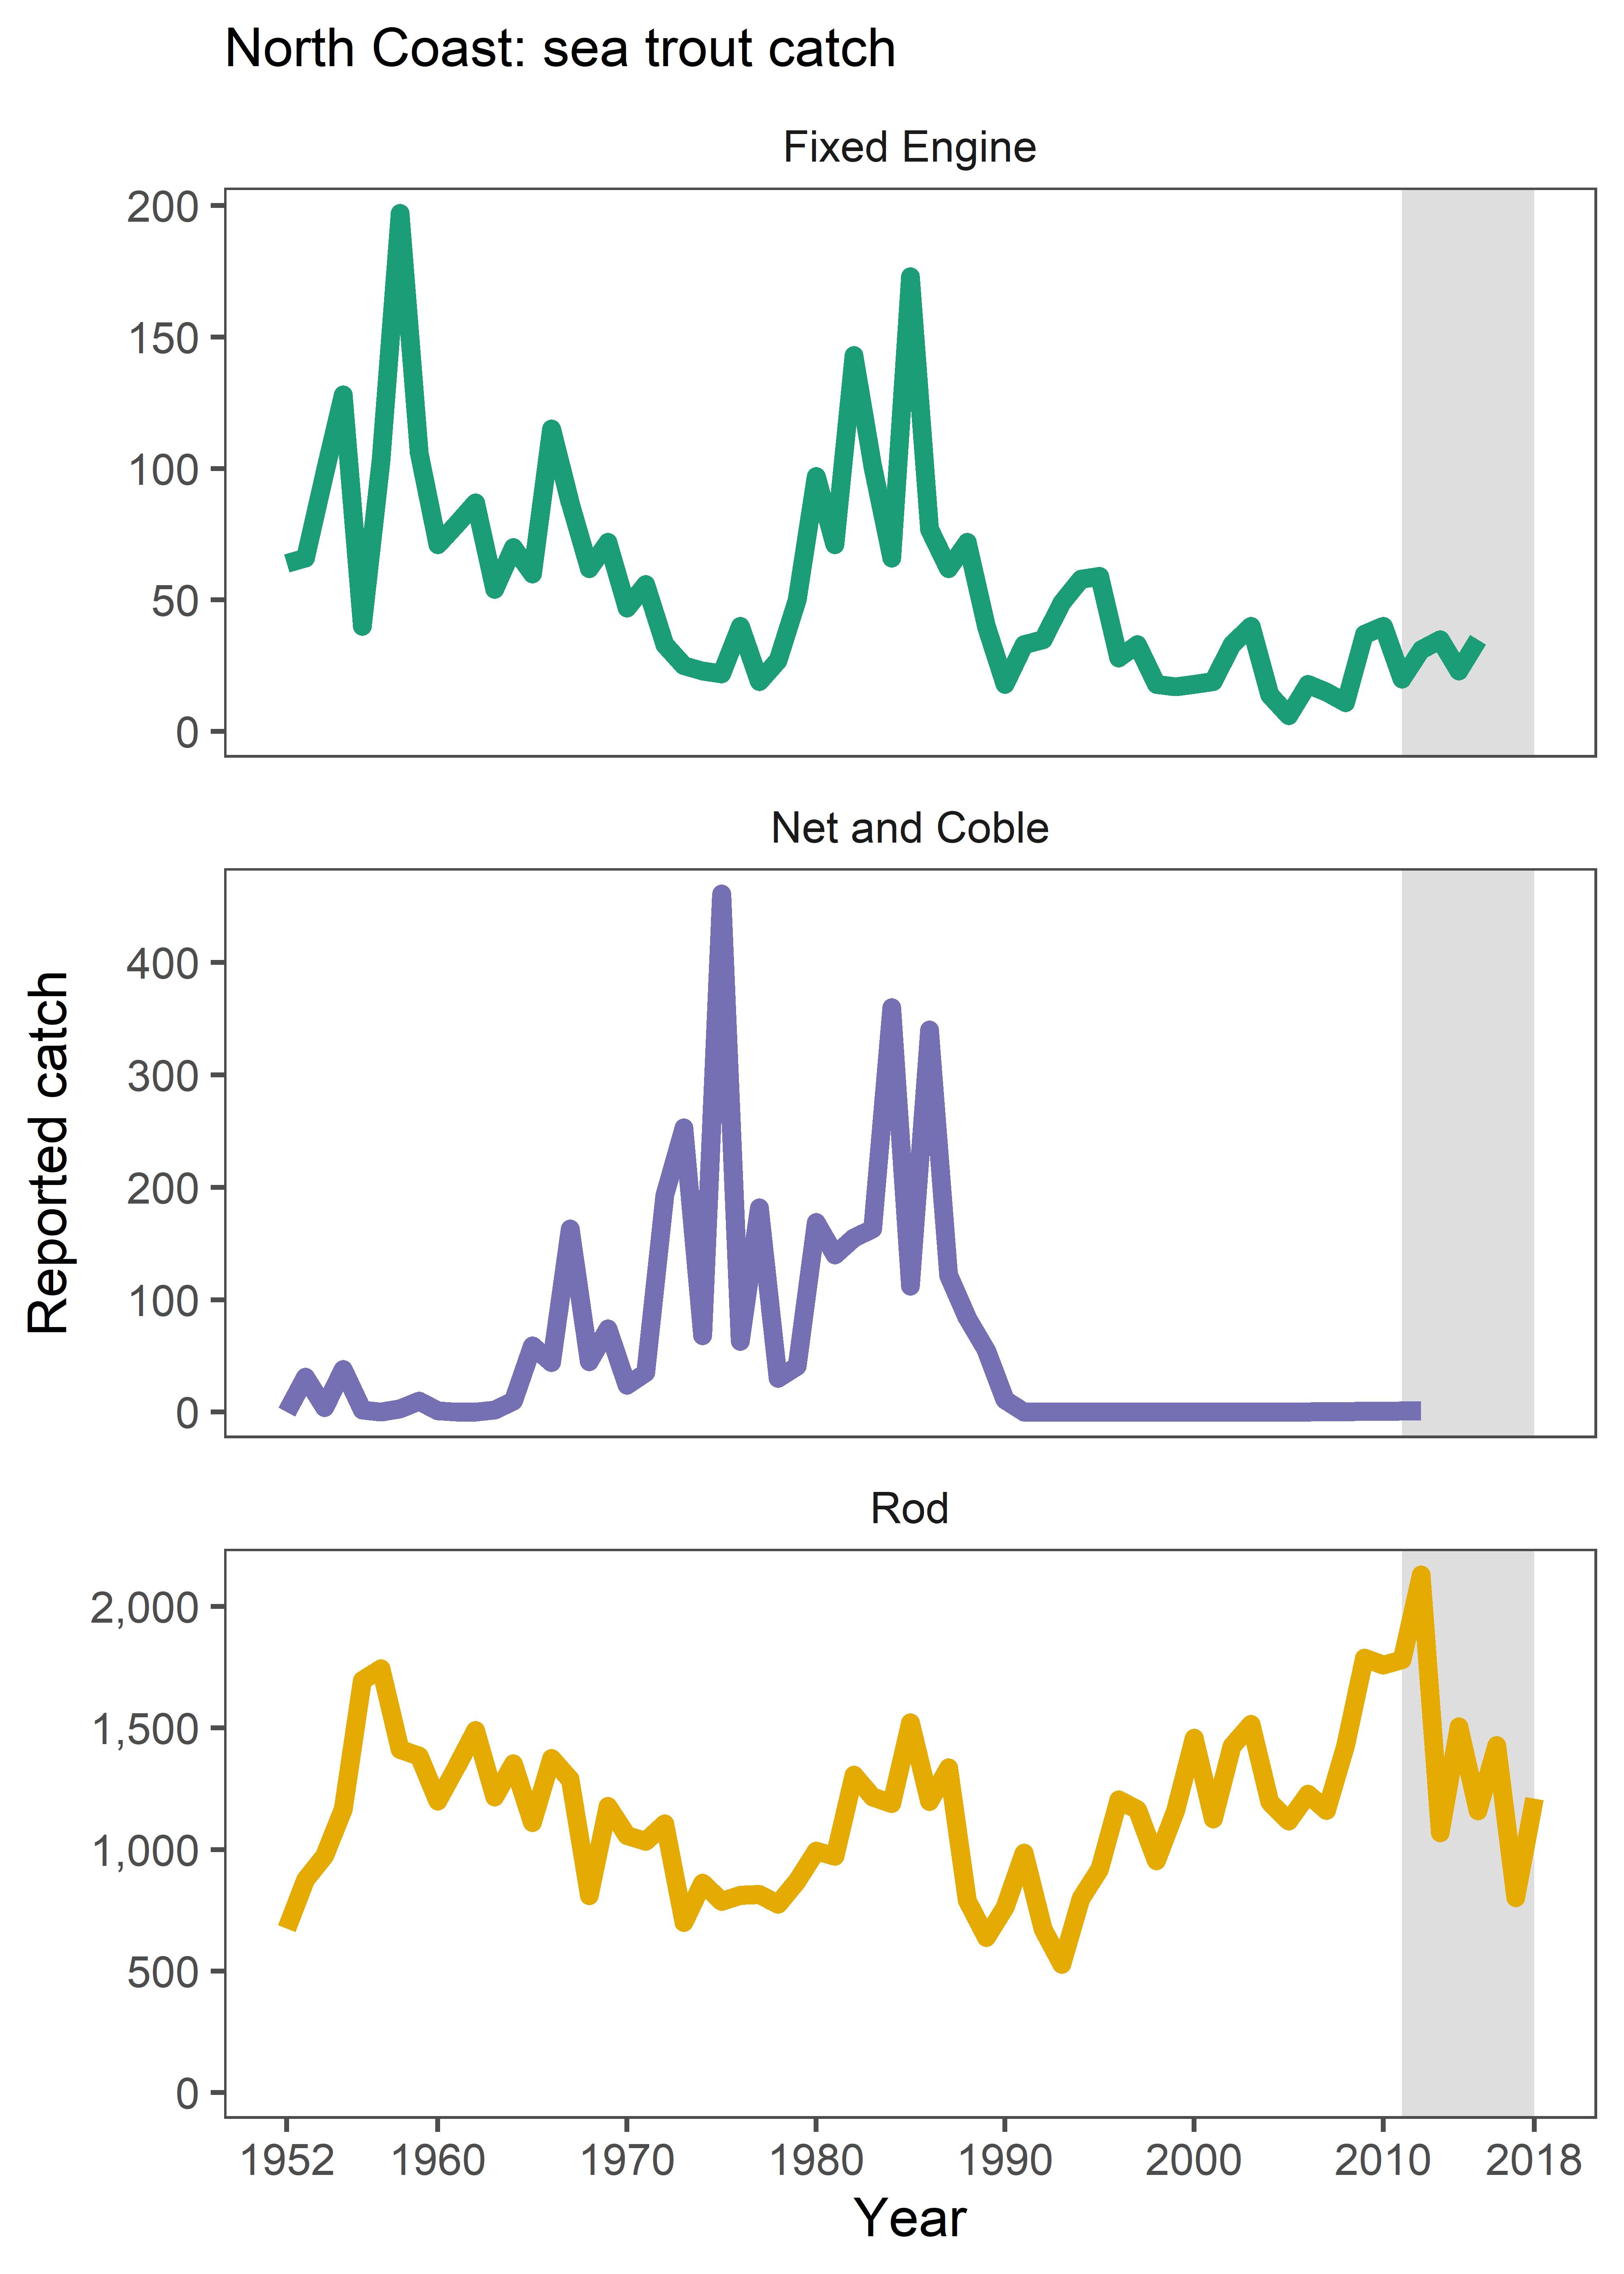 Figure i: Reported catches of sea trout from the fixed engine, net and coble and rod fisheries in the North Coast SMR 1952 to 2018.